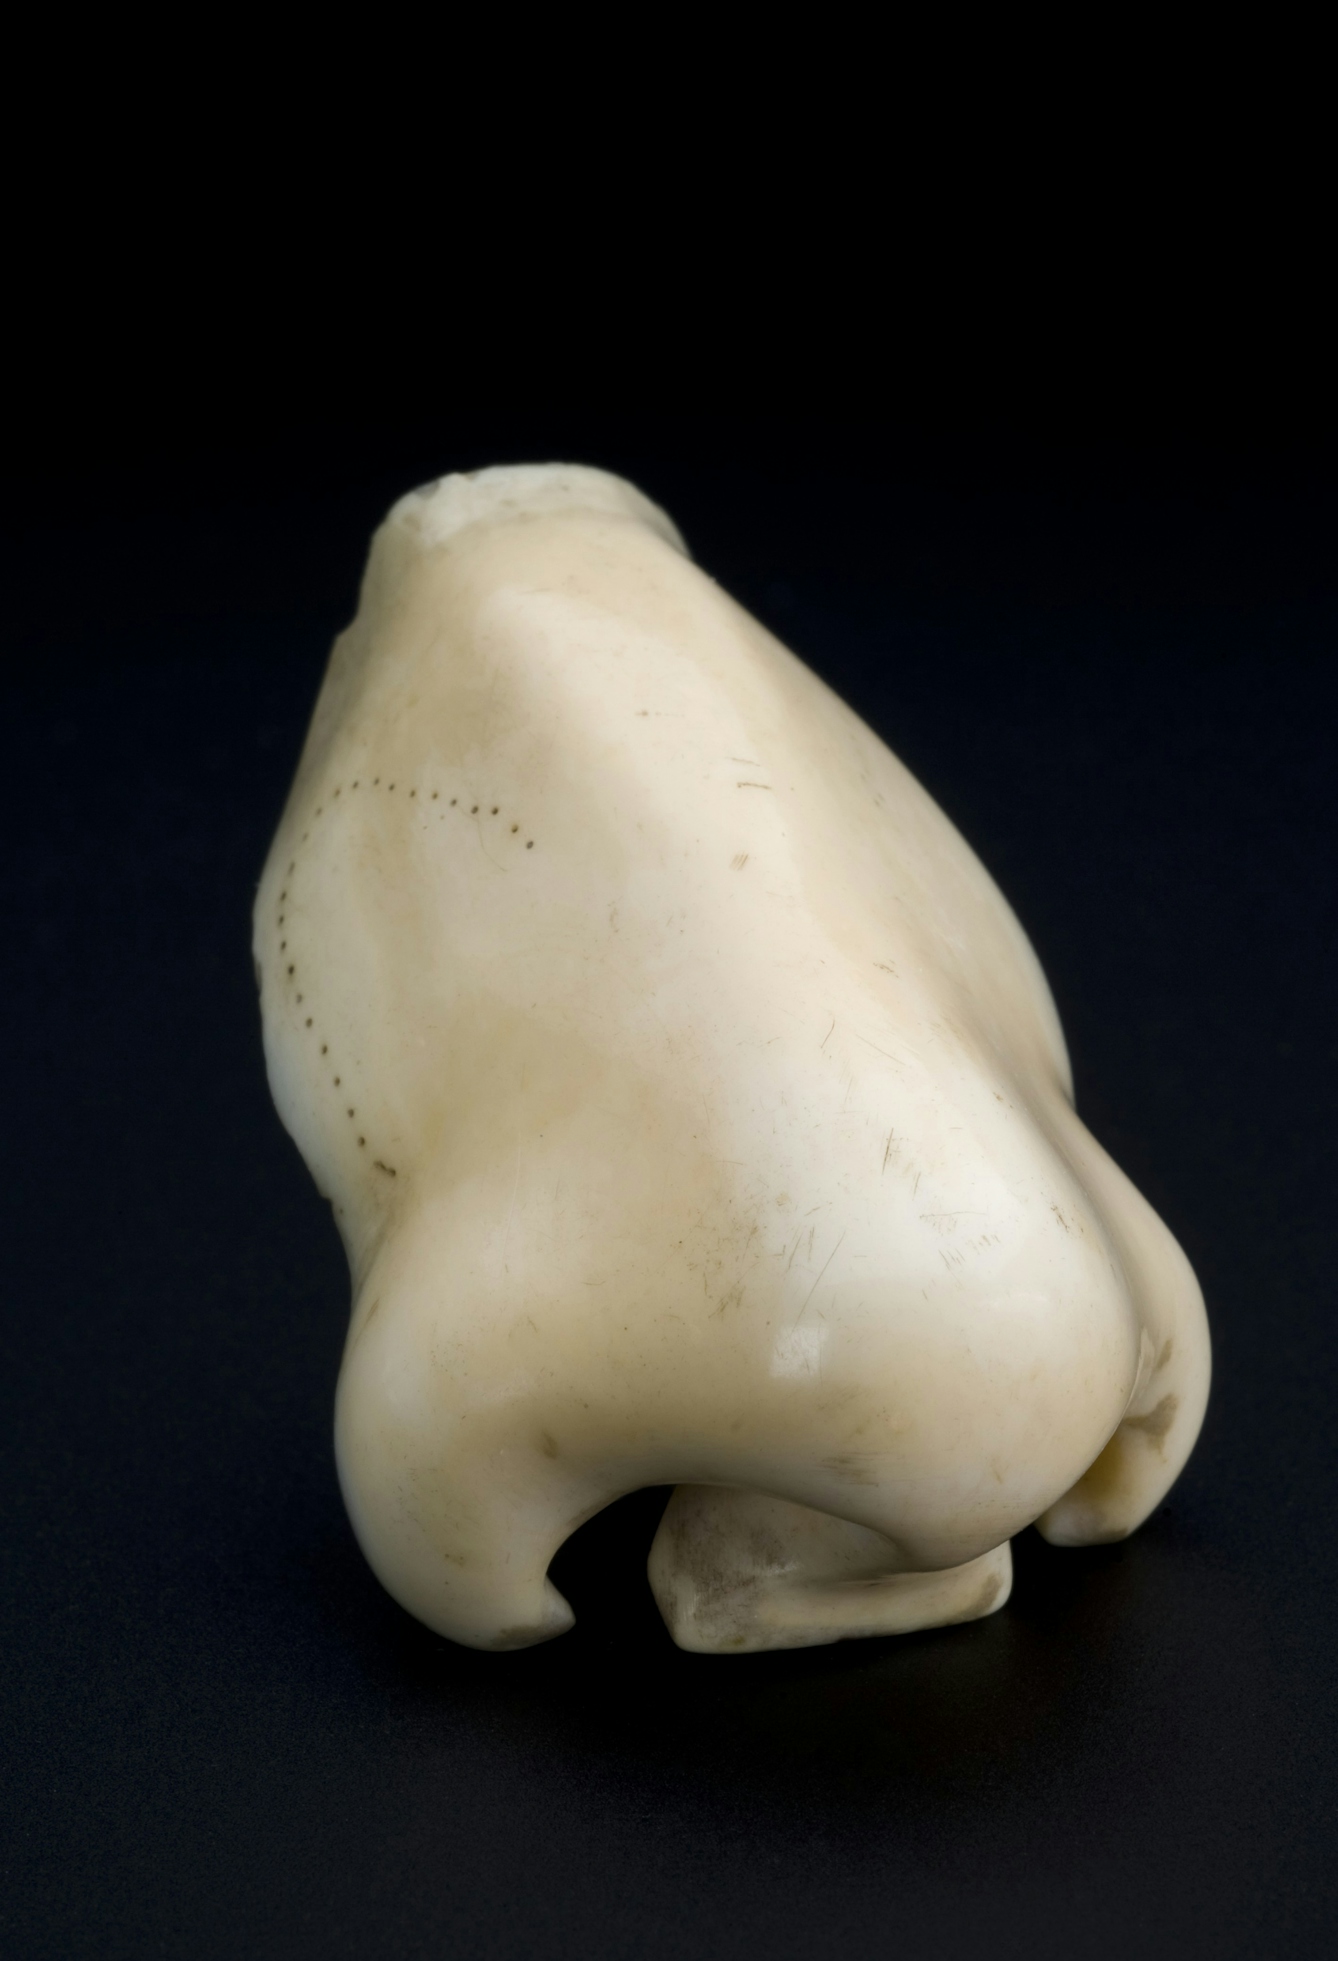 A piece of porcelain in the shape of a human nose on a dark background.